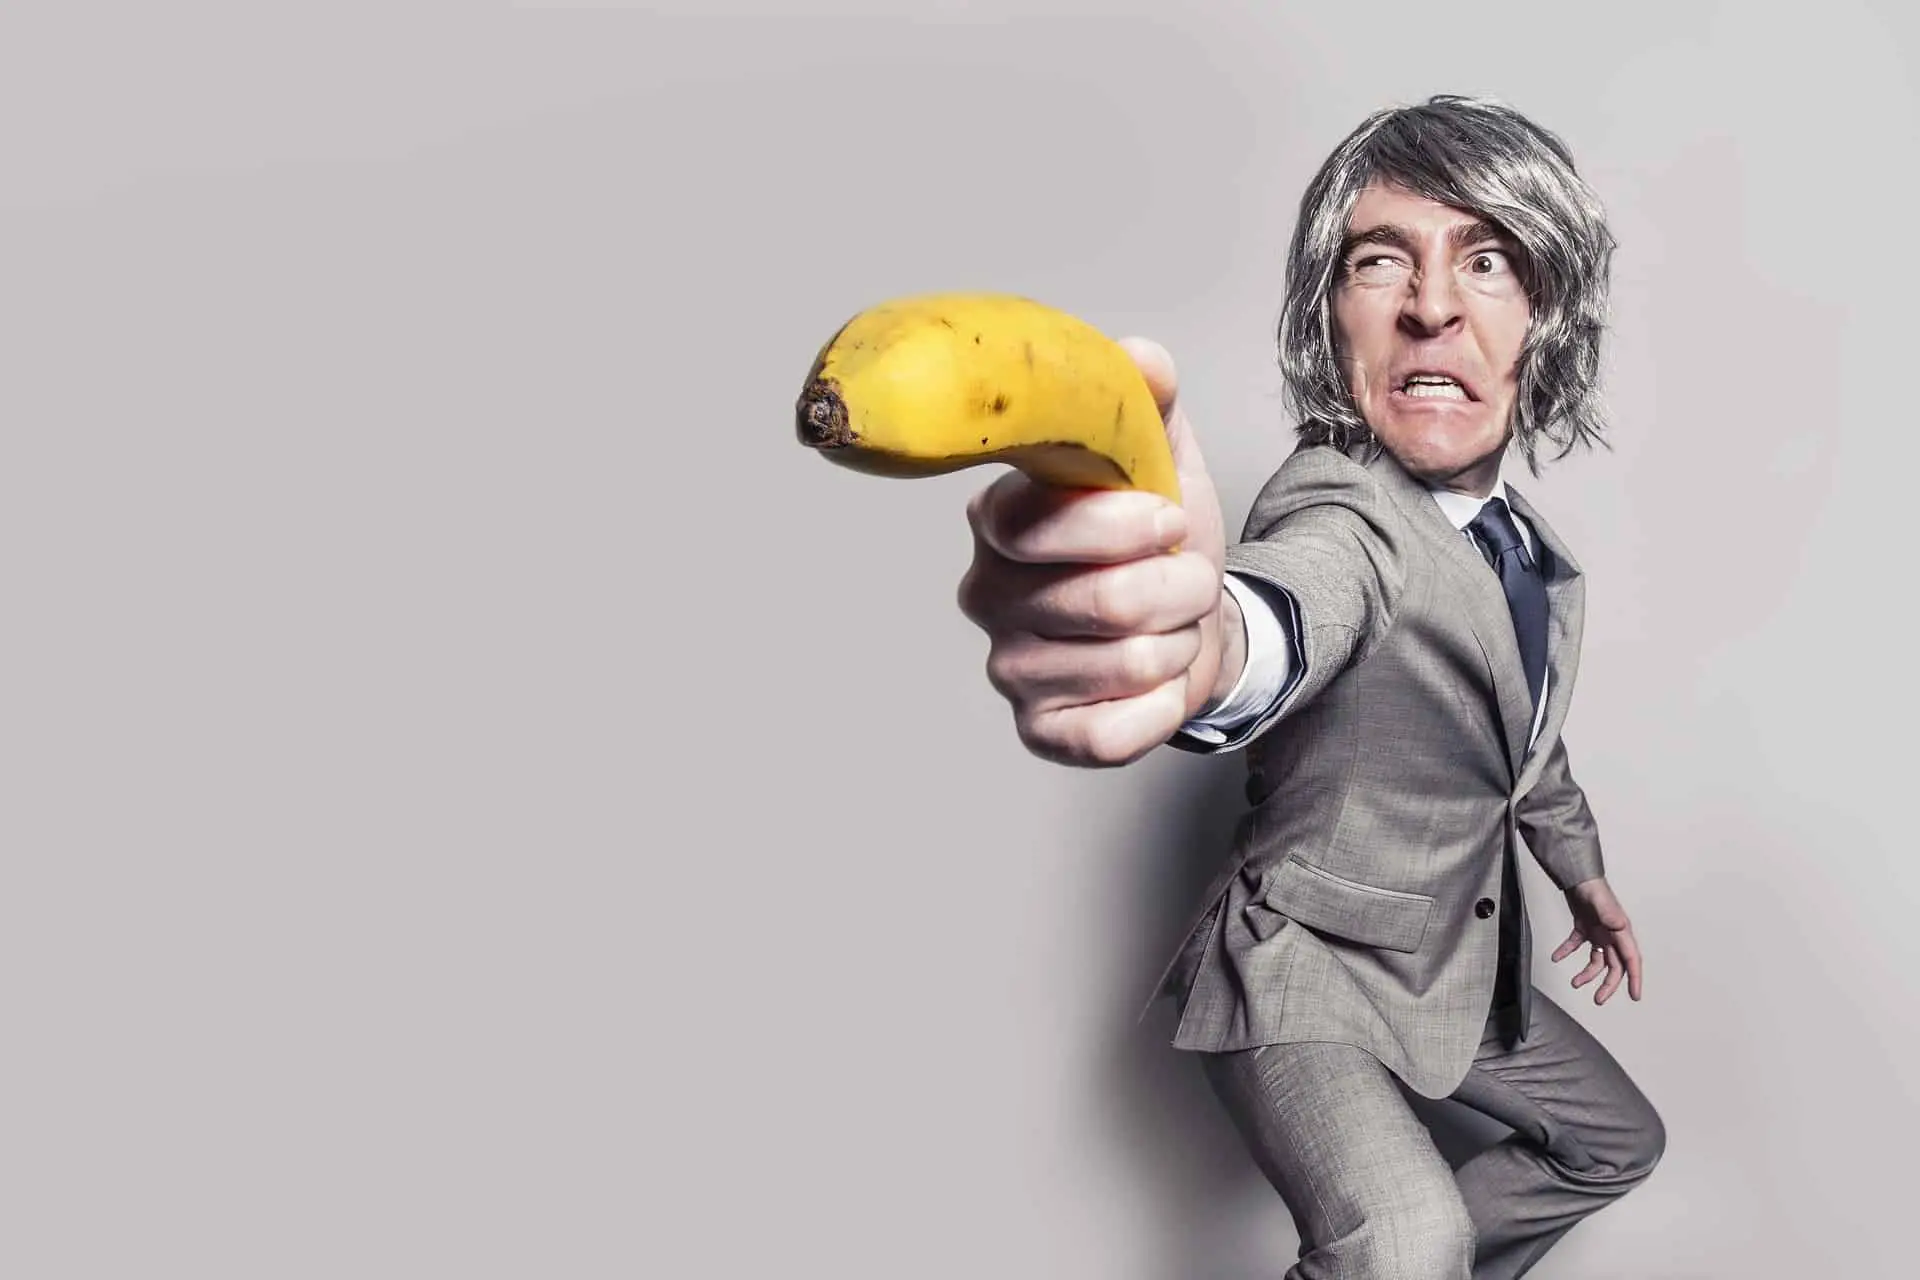 Man in a suit holding a banana like a gun